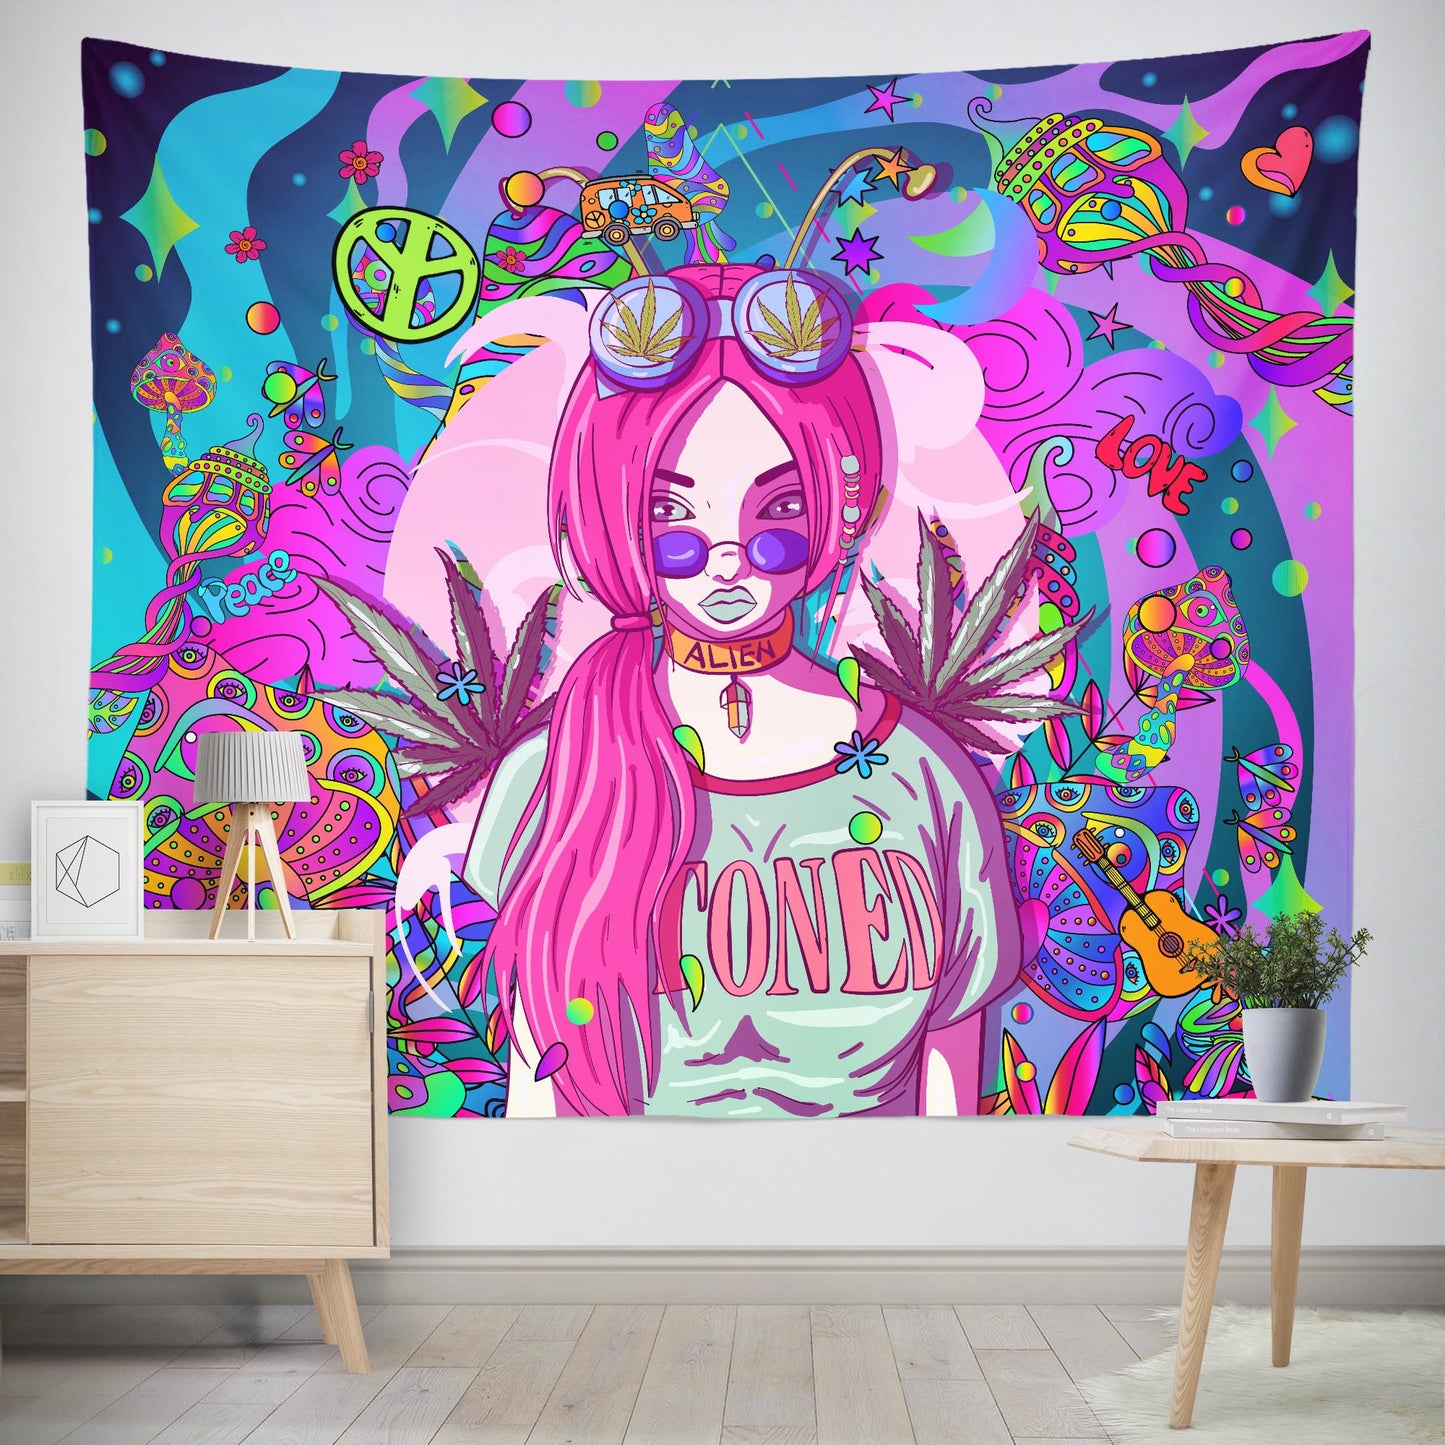 Trippy stoner girl wall tapestry with vibrant pink and blue colors